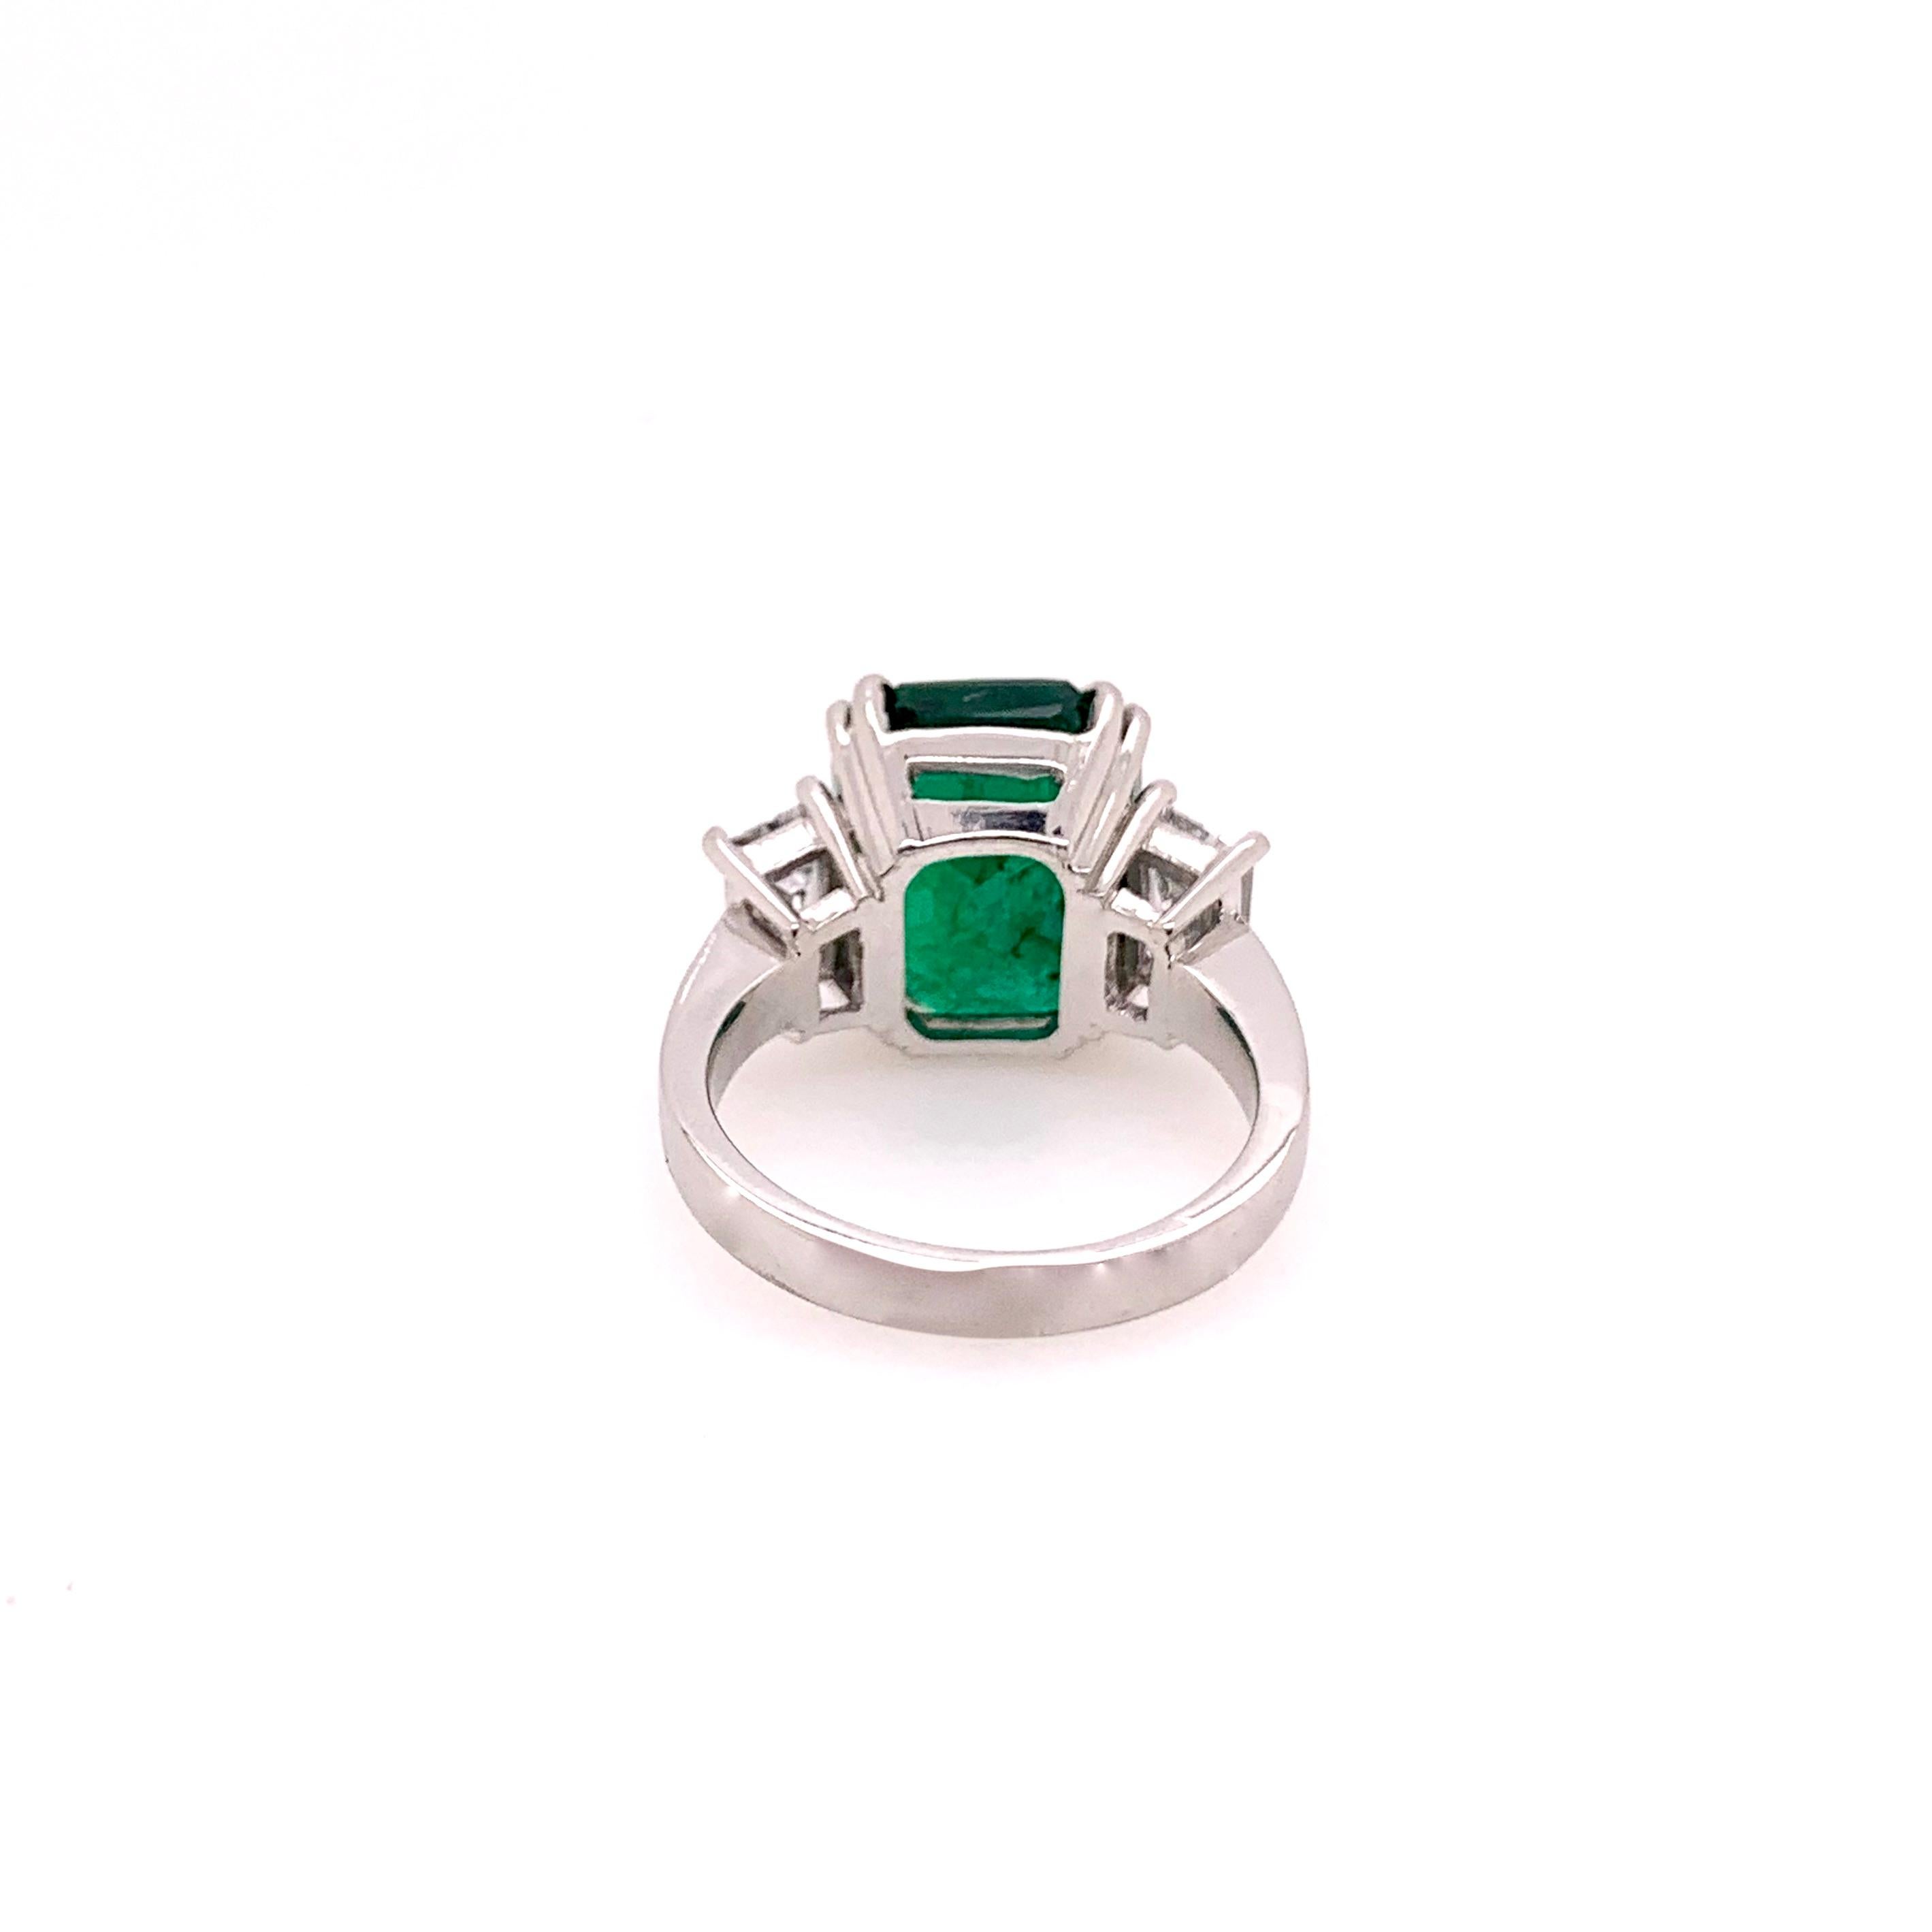 Emerald Cut Platinum GIA Certified Emerald Ring with Diamonds 3-Stone Ring